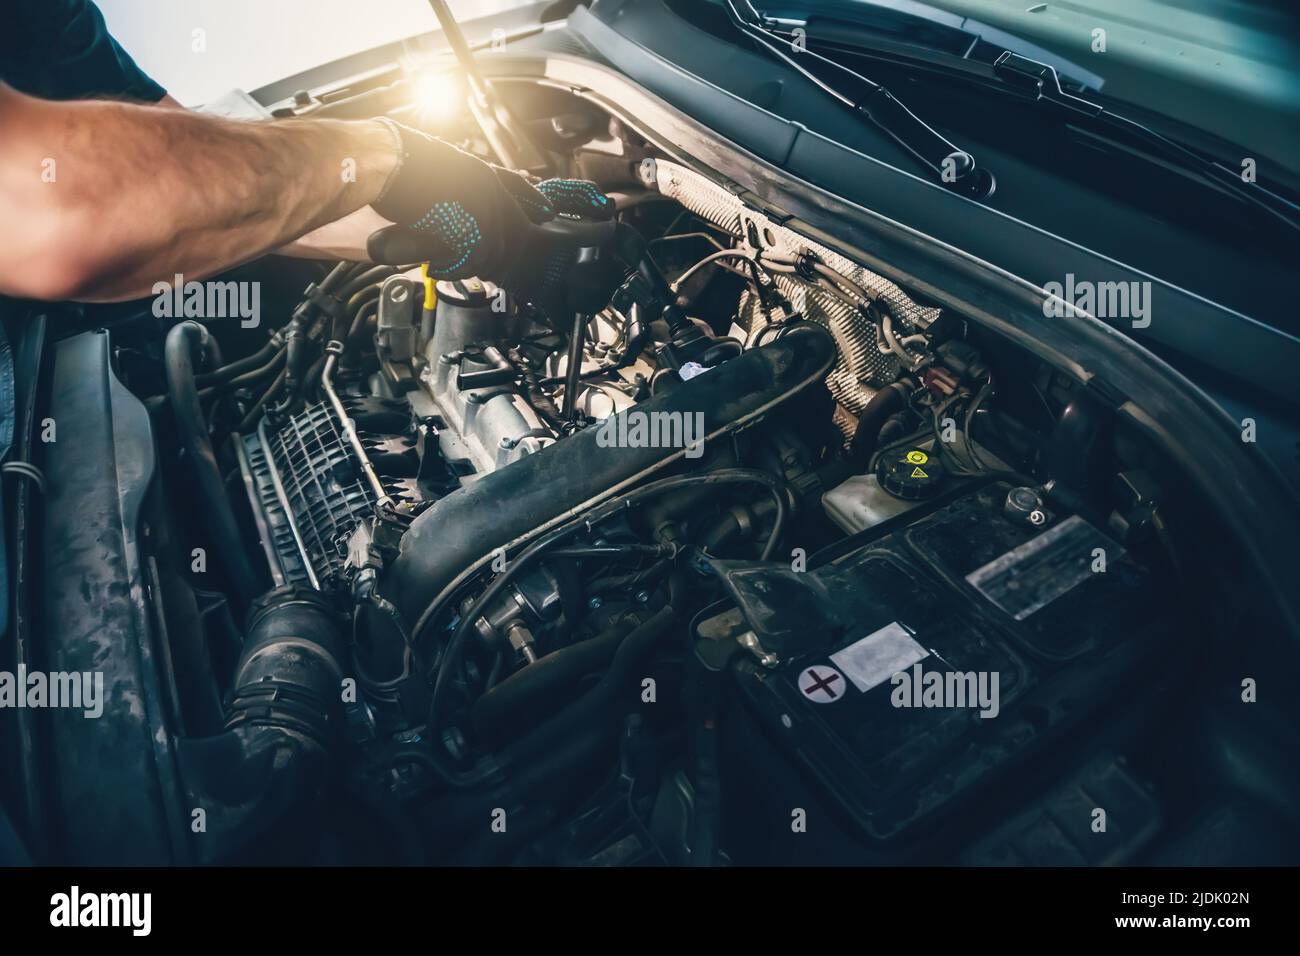 Serviceman changes spark plugs in modern turbocharged engine. Timely maintenance and replacement of consumables in car. Stock Photo